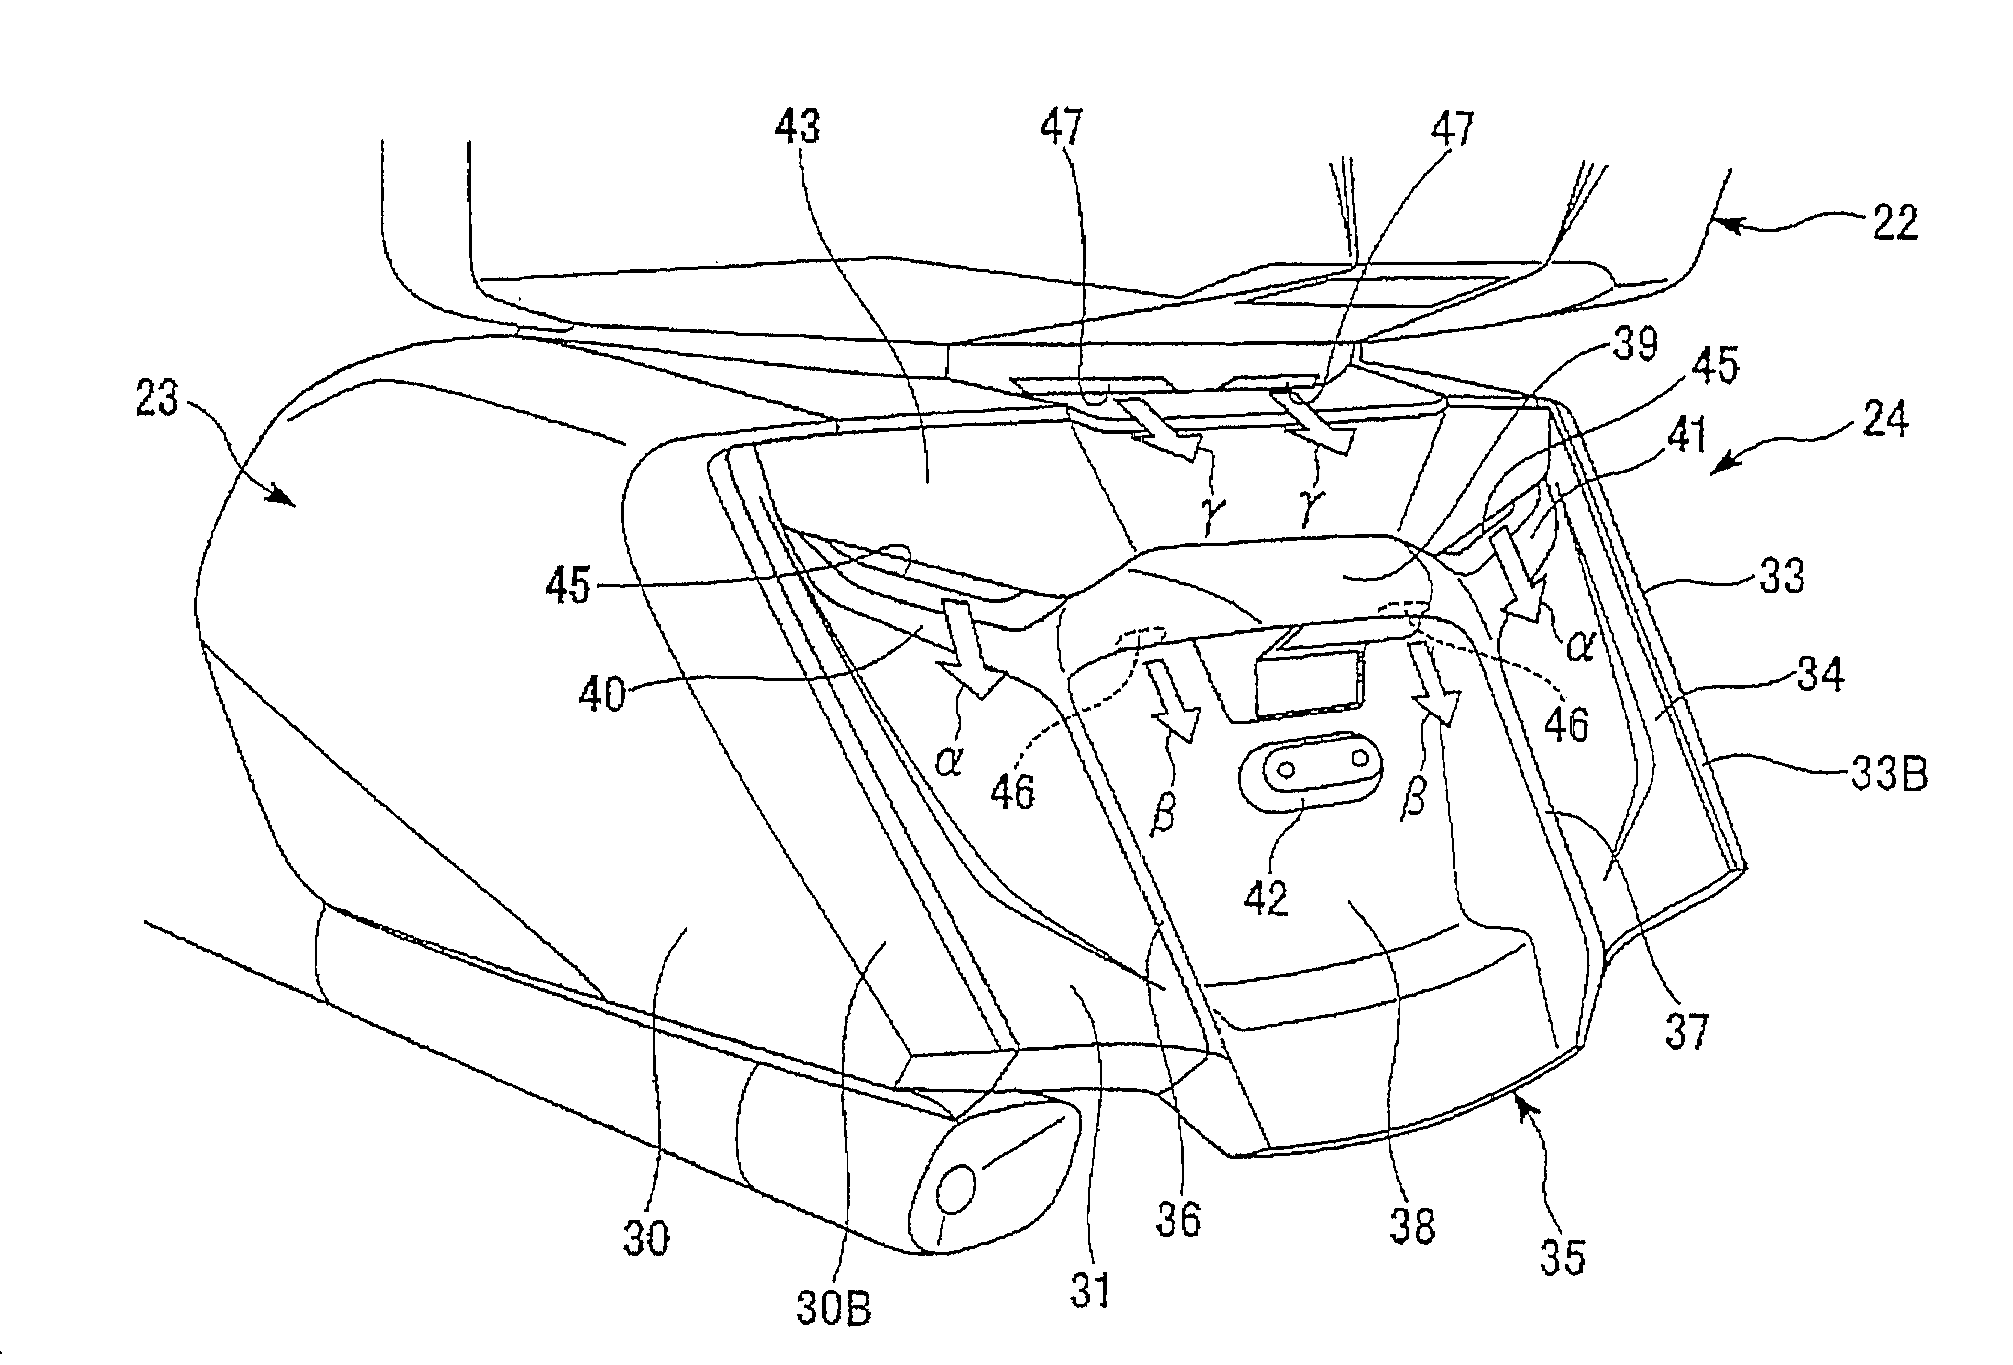 Rear structure of straddle-ride type vehicle